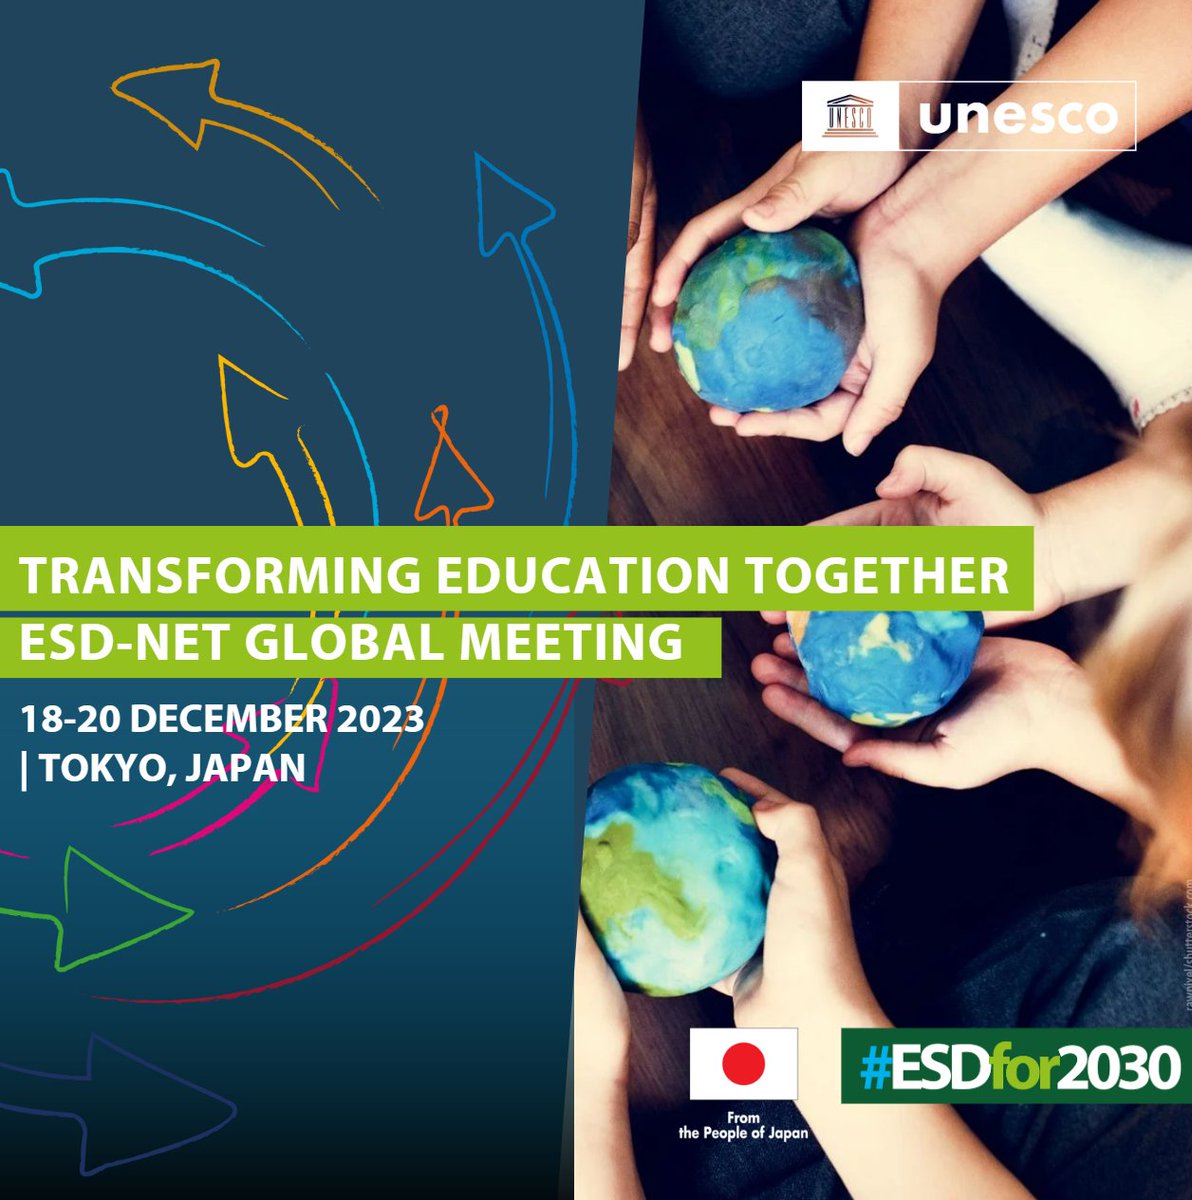 IAU Secretary General @VantlandH is at the @UNESCO #ESDNet Global Meeting this week discussing Transformative Education & how to elevate the role of higher education to address the #climatecrisis. #esdfor2030 #greeningeducation #learnforourplanet #transformingeducationtogether